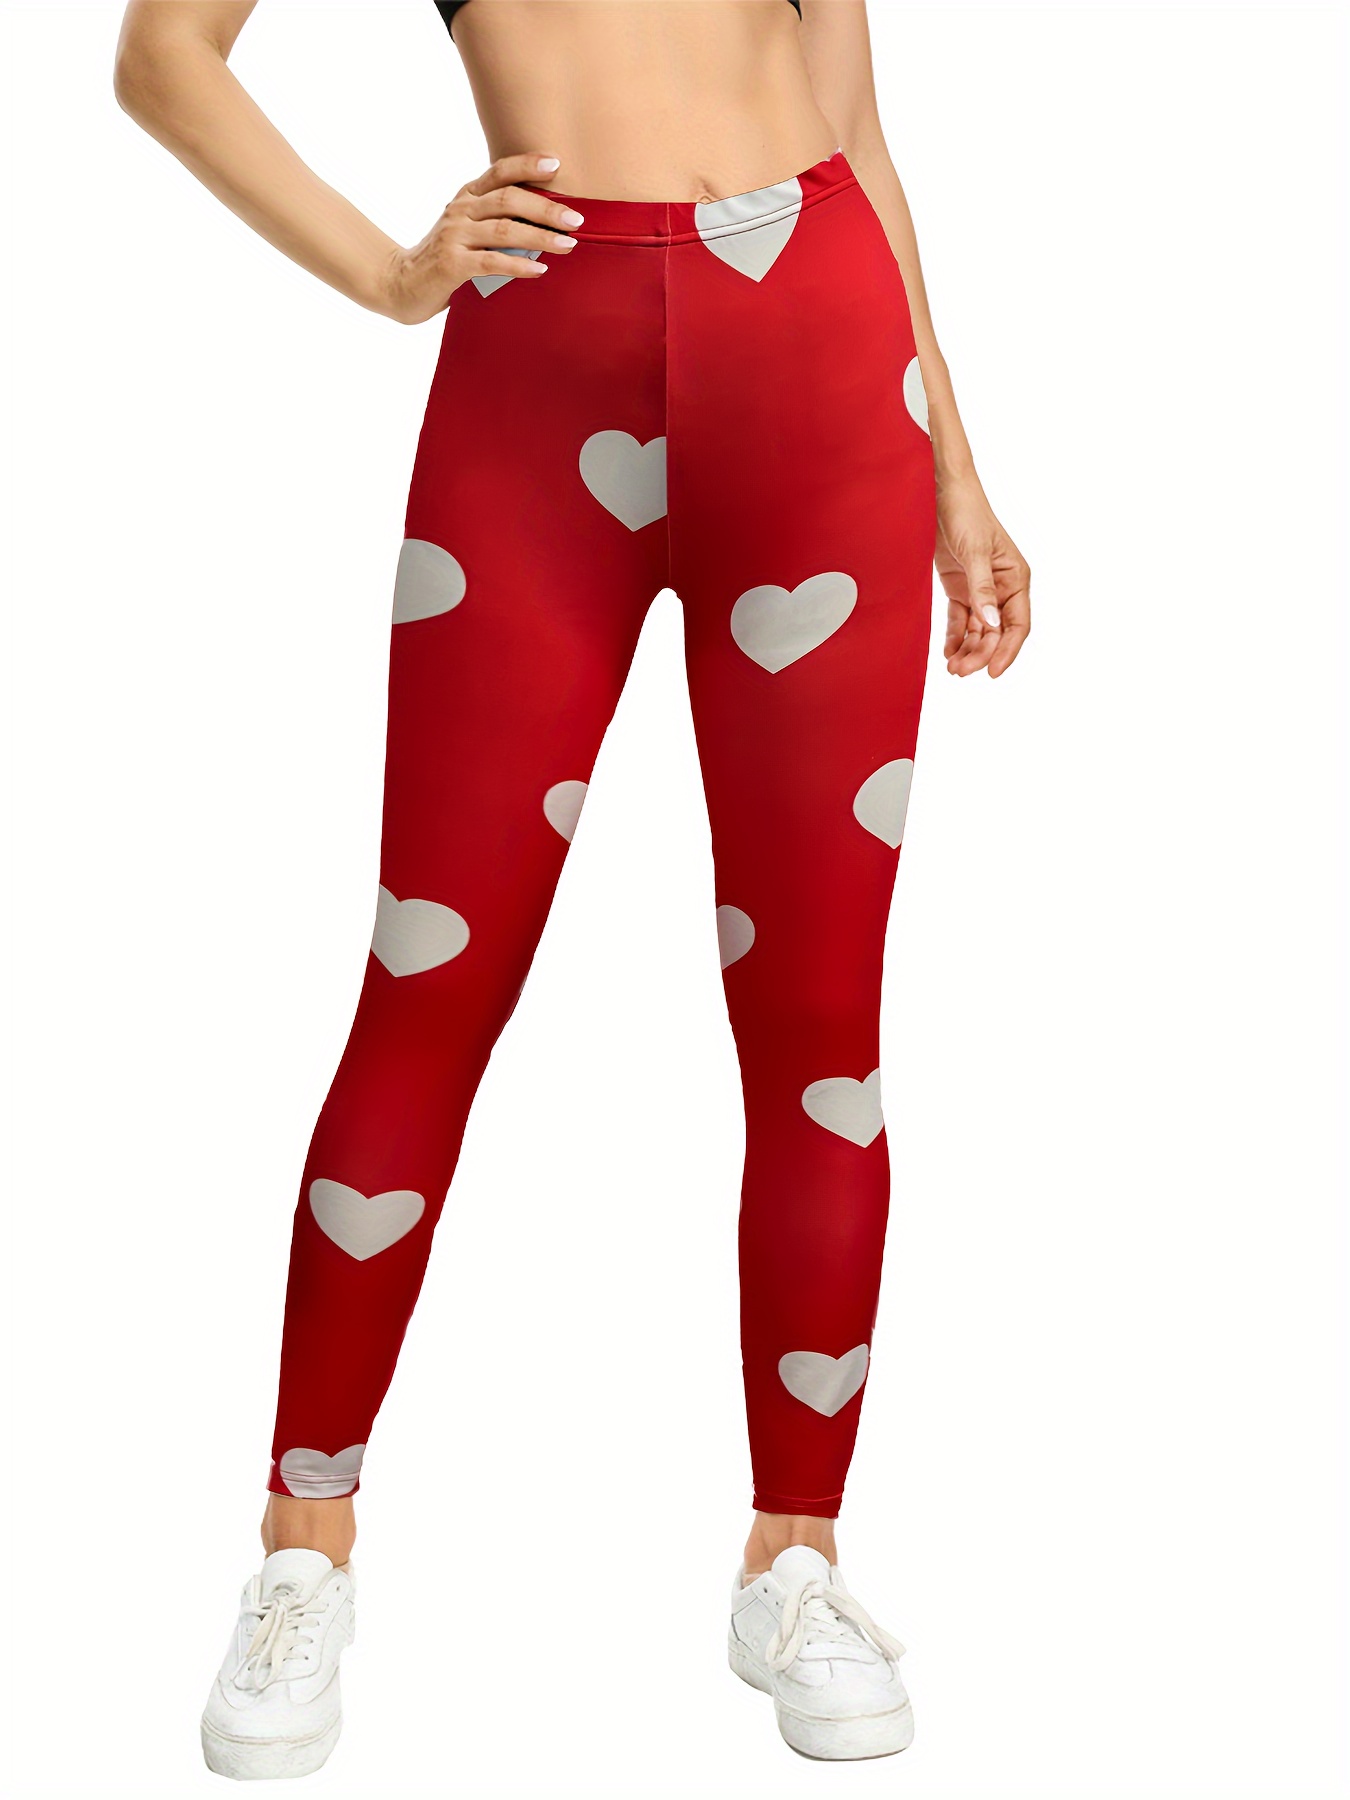 Heart Print Sports Leggings For Women, High Waisted Yoga Pants For Workout  Running, Women's Activewear